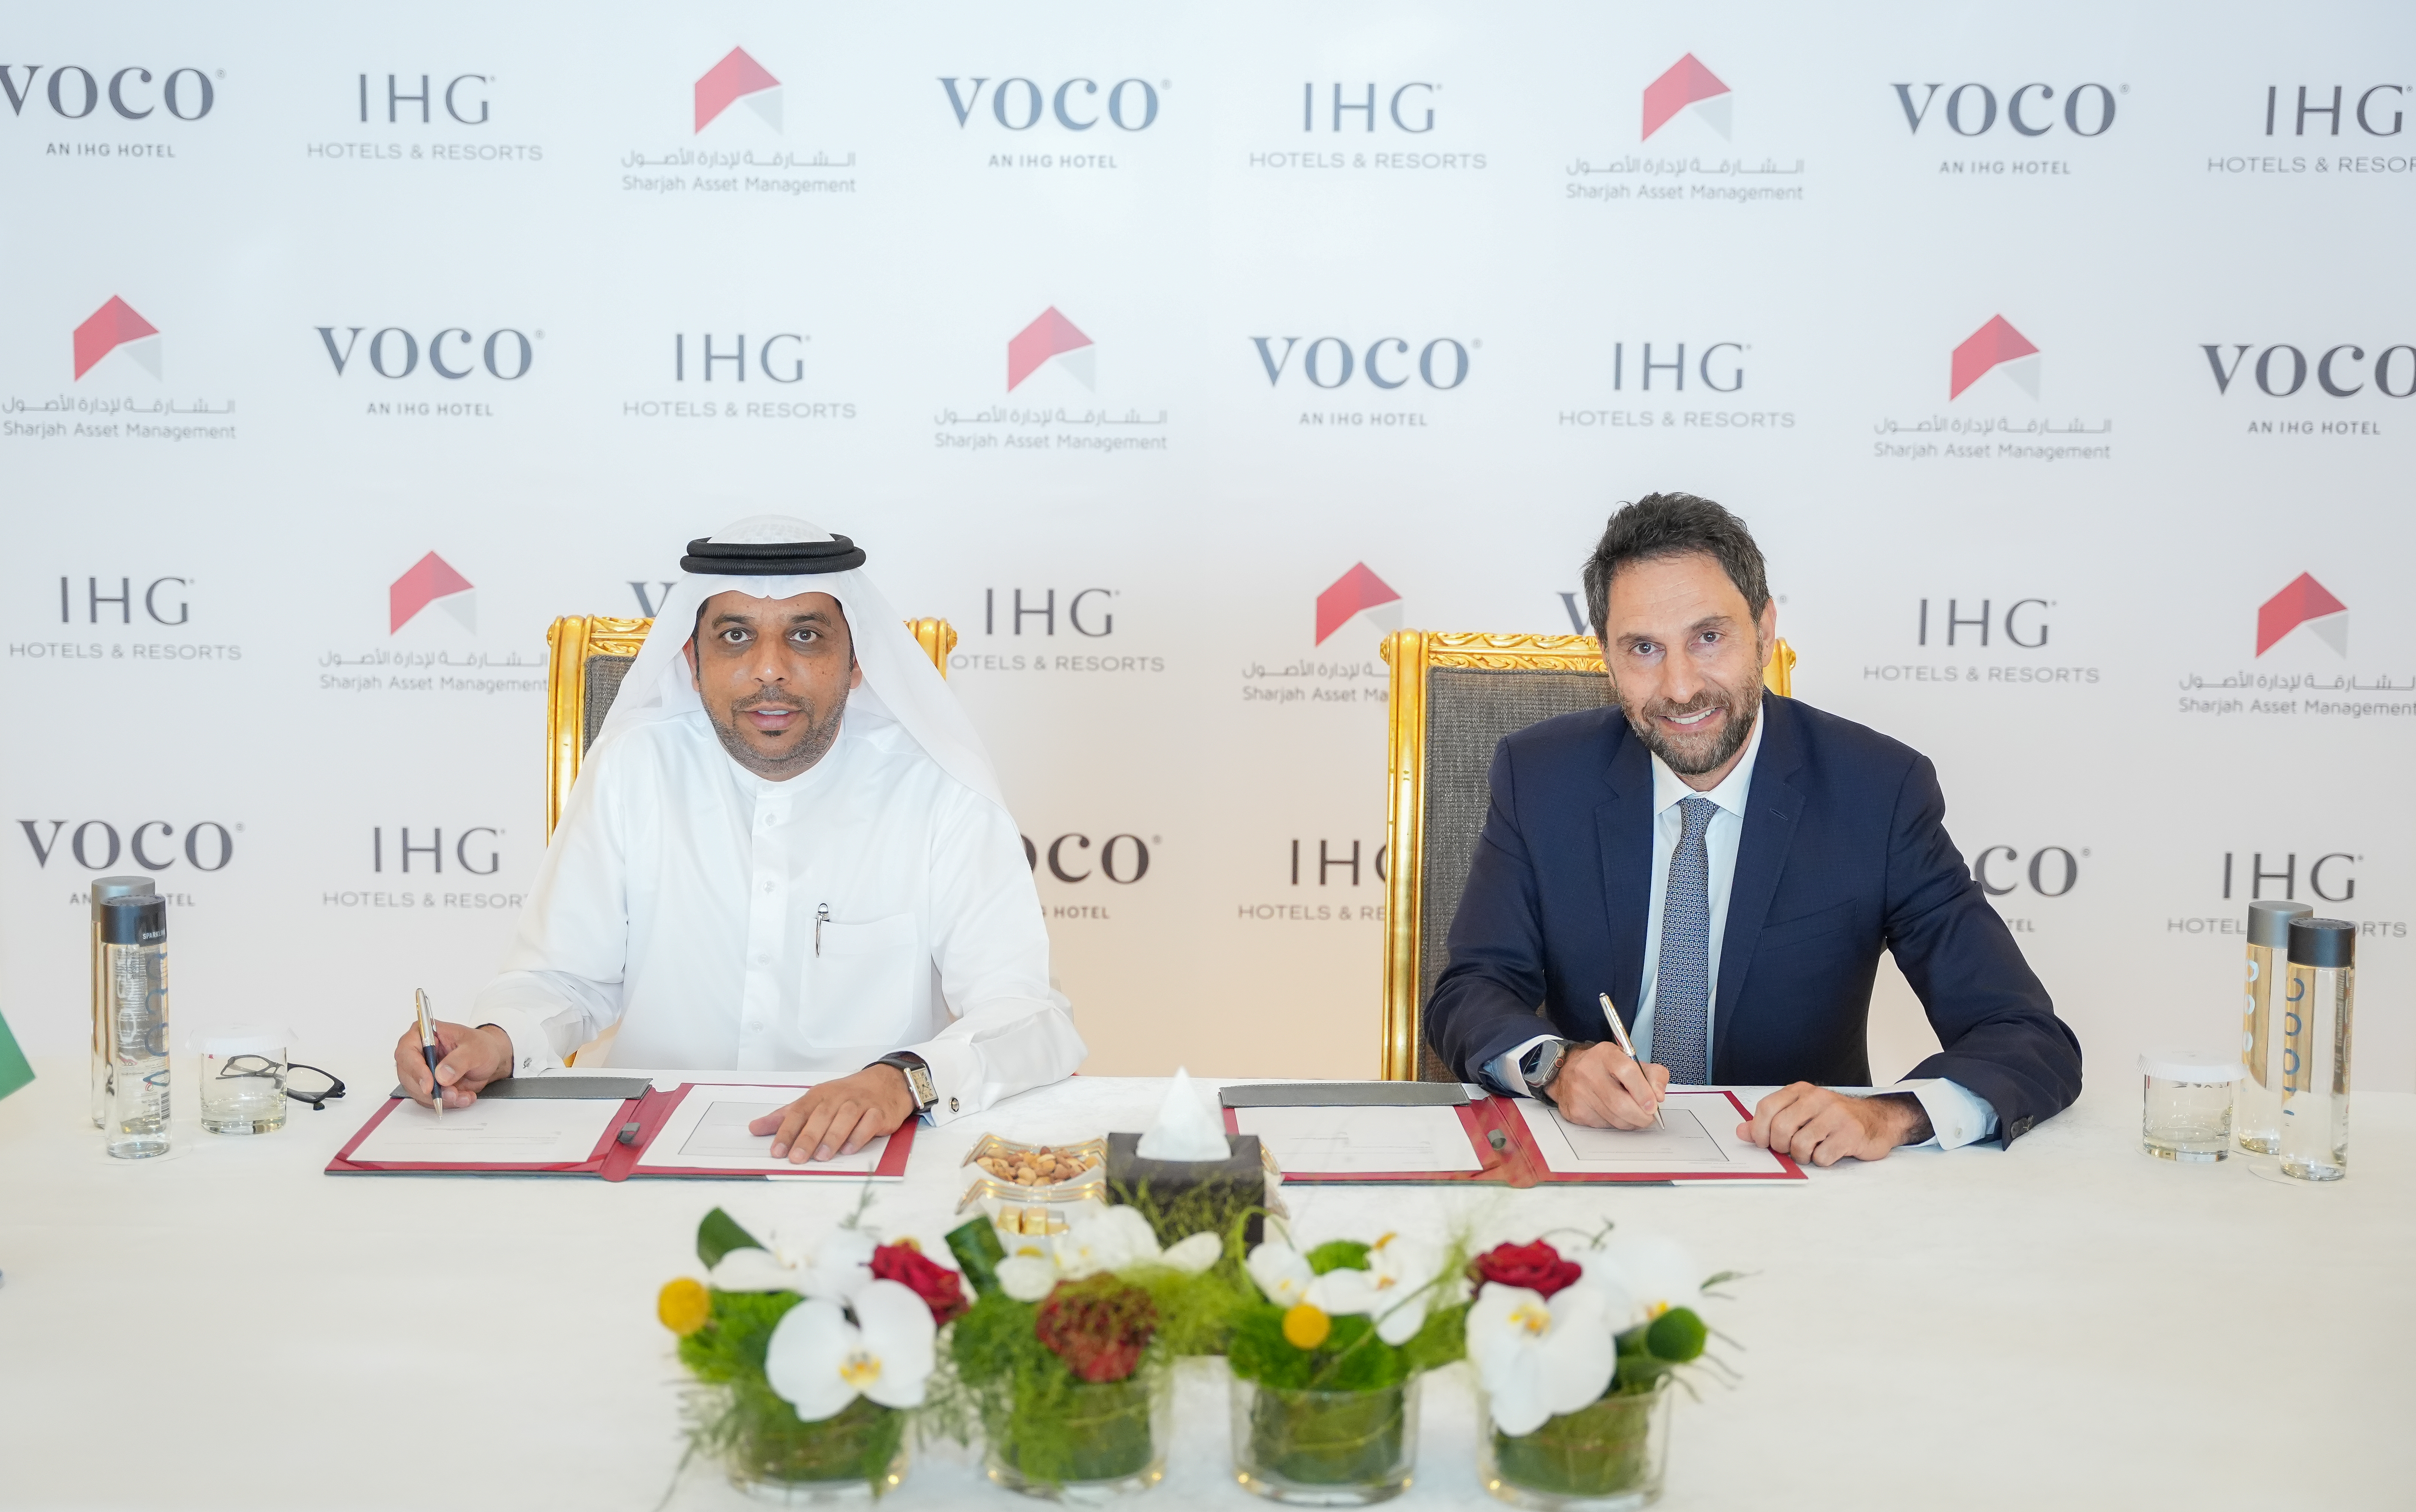 His Excellency Waleed Al Sayegh, CEO of Sharjah Asset Management and Haitham Mattar, Managing Director, IHG Hotels & Resorts India, Middle East and Africa